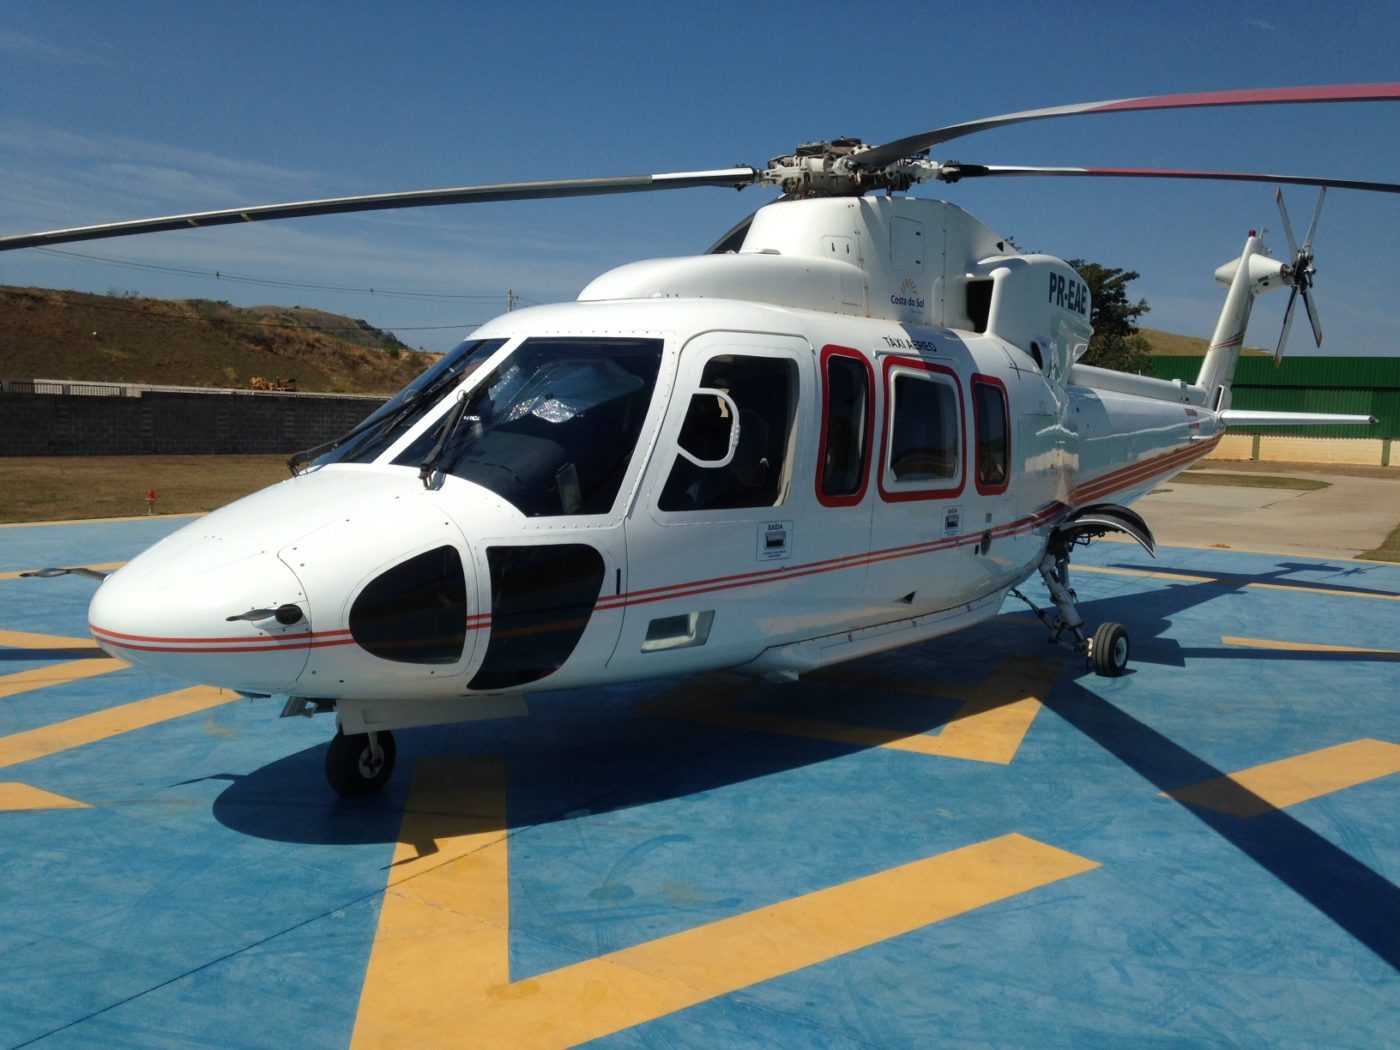 Skytrac real-time data management helps operators improve safety and maintenance event response times by notifying key contacts of critical in-flight incidents. Costa do Sol Photo